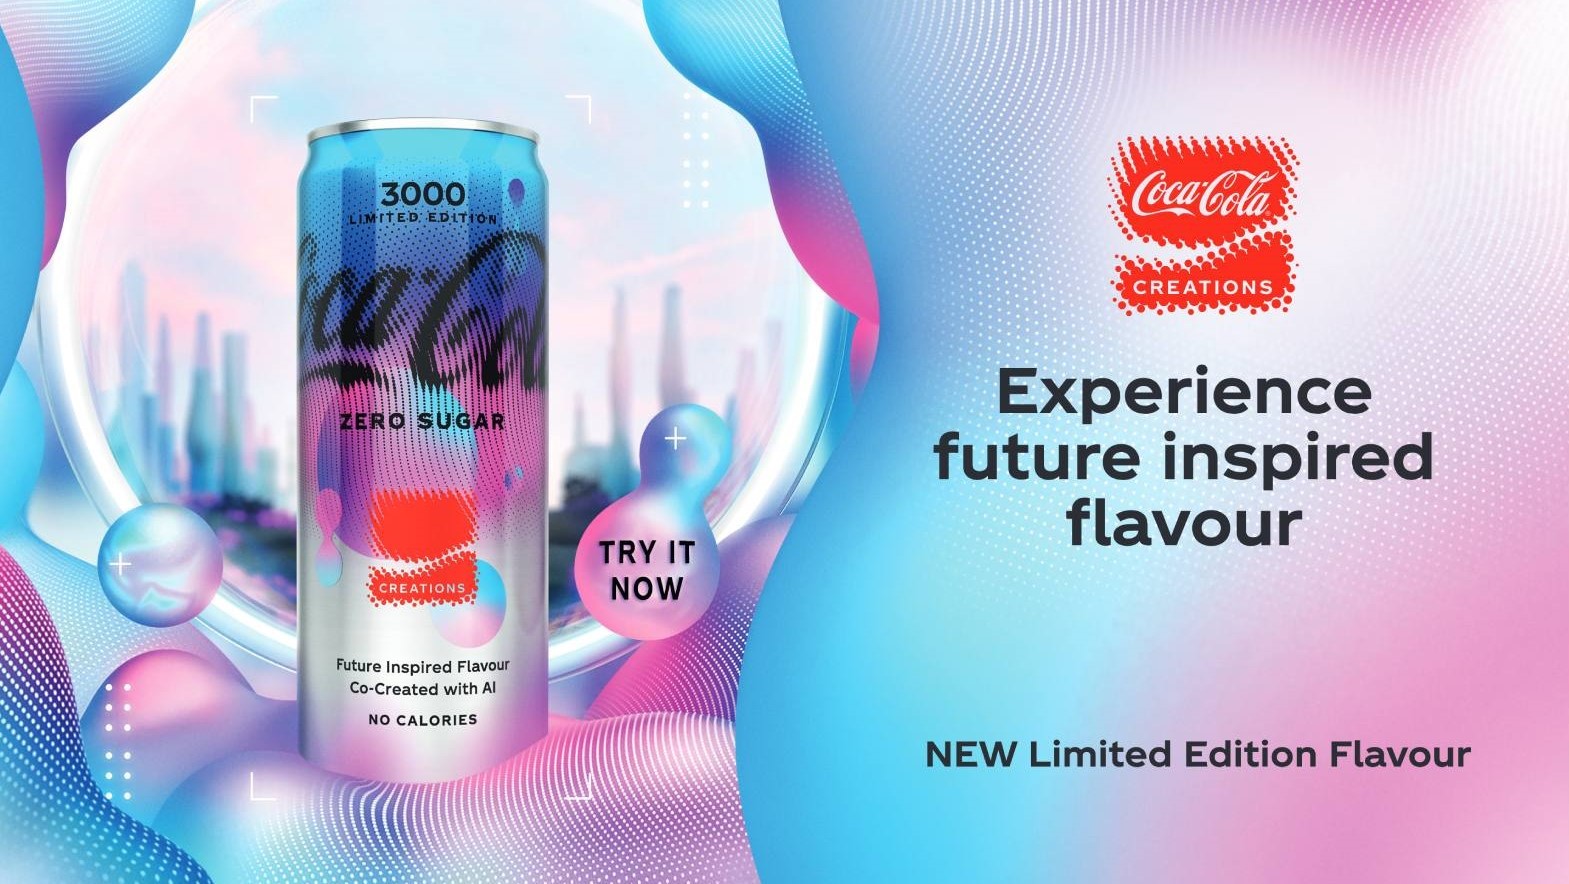 image of the new Coke Creations 3000 can